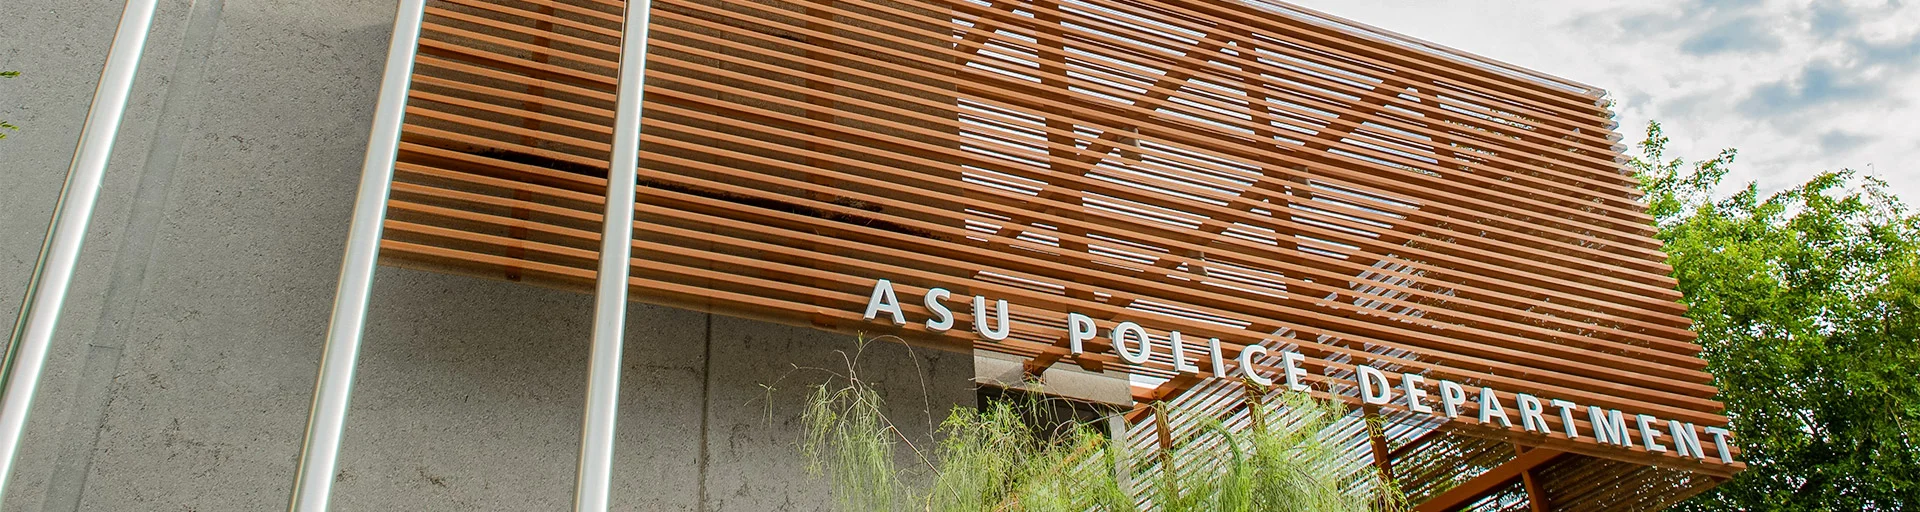 Exterior of the ASU Police Department building